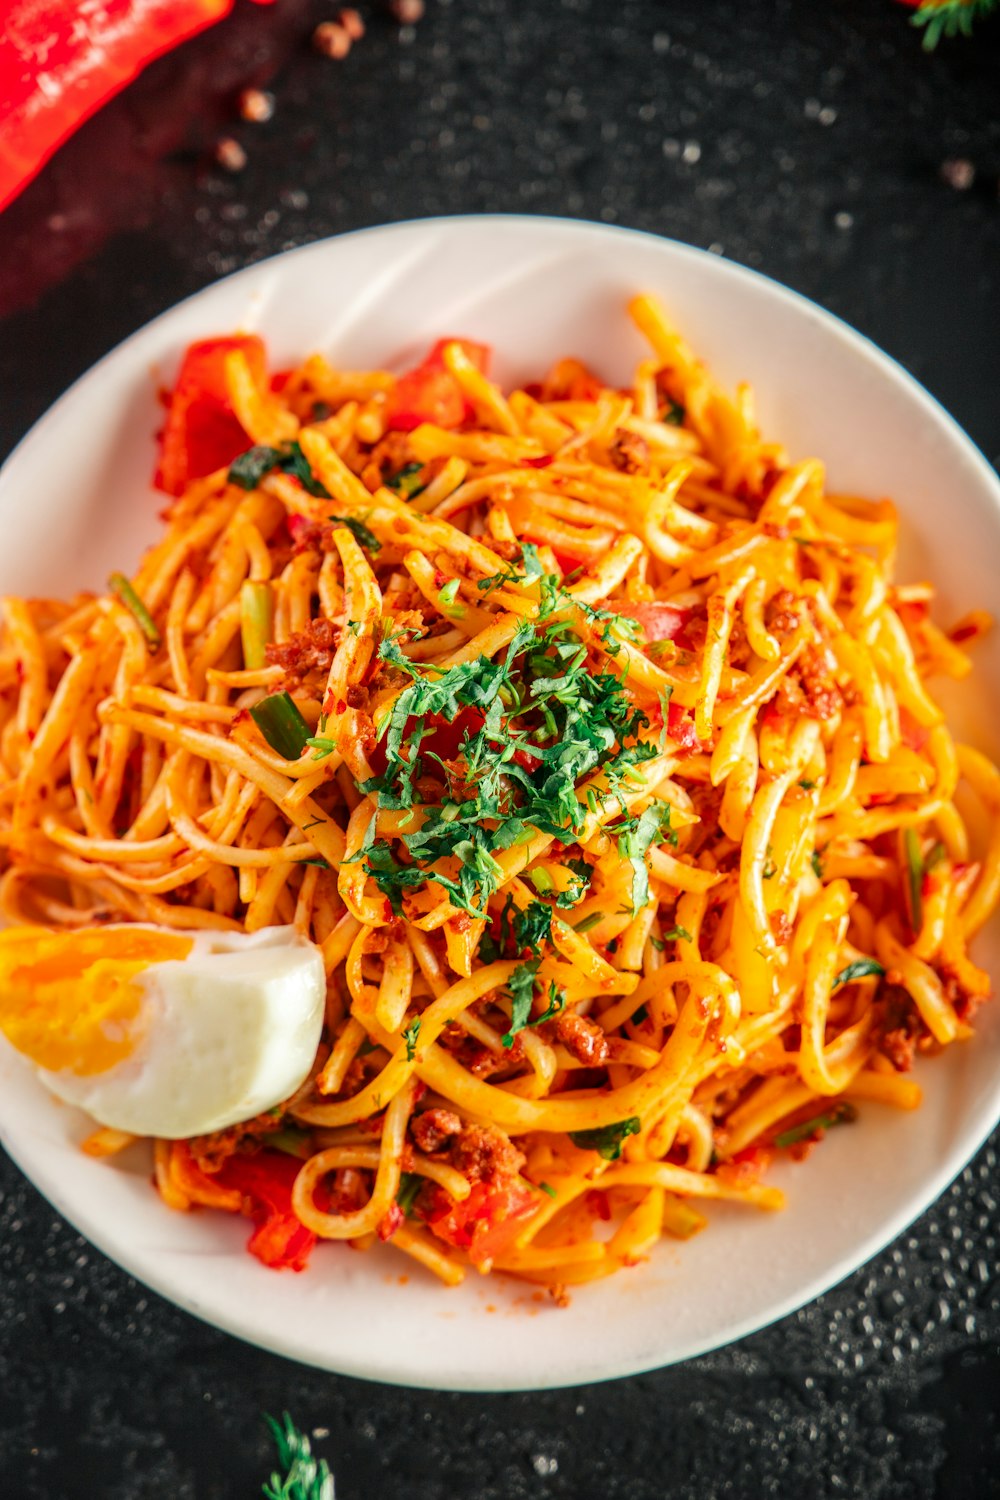 a plate of spaghetti with tomato sauce and parsley